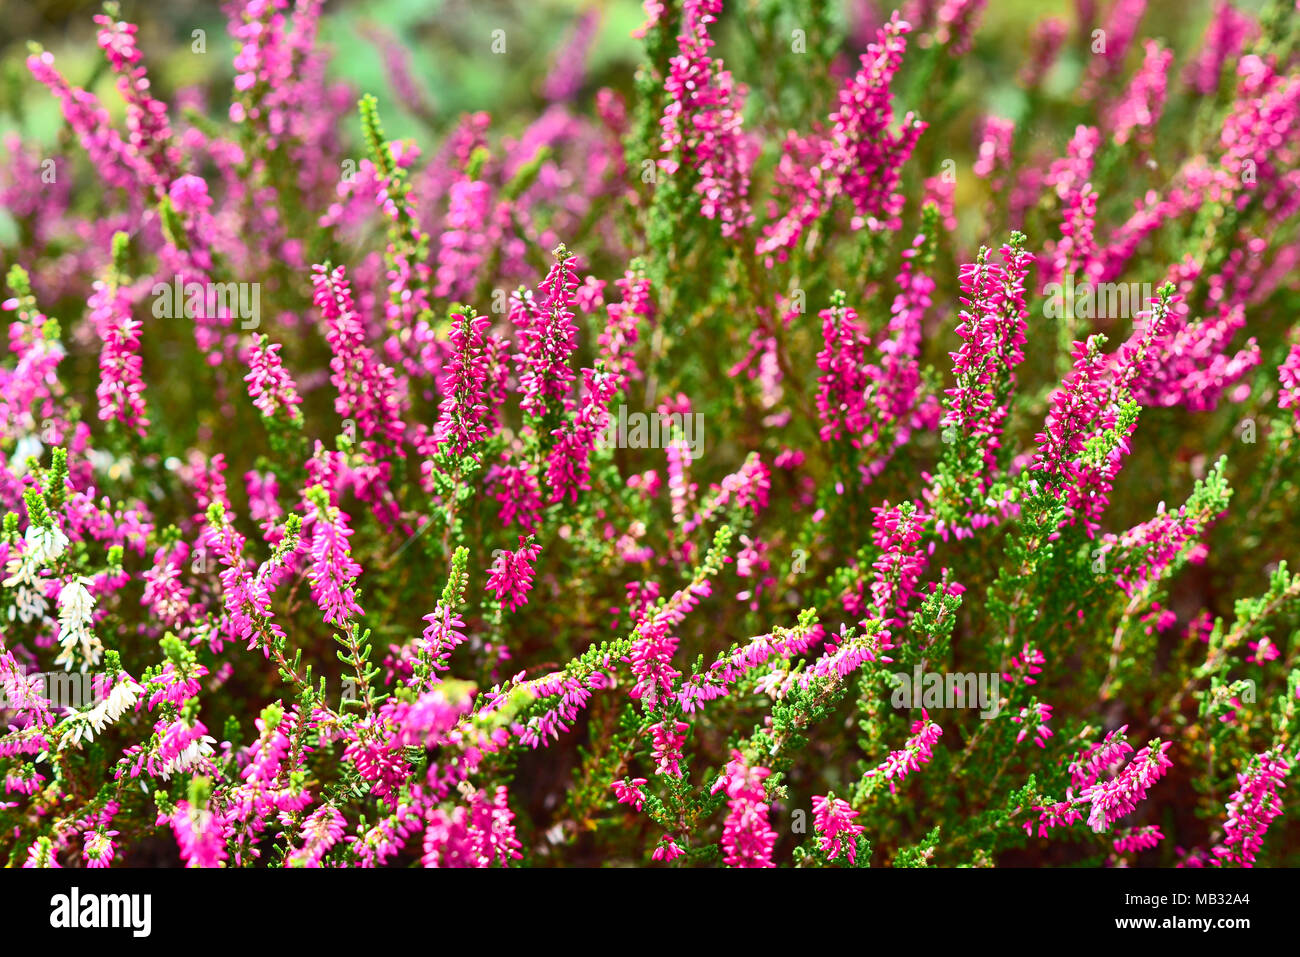 Pink heather or erica flowers, closeup shot of a blooming heather field. Stock Photo